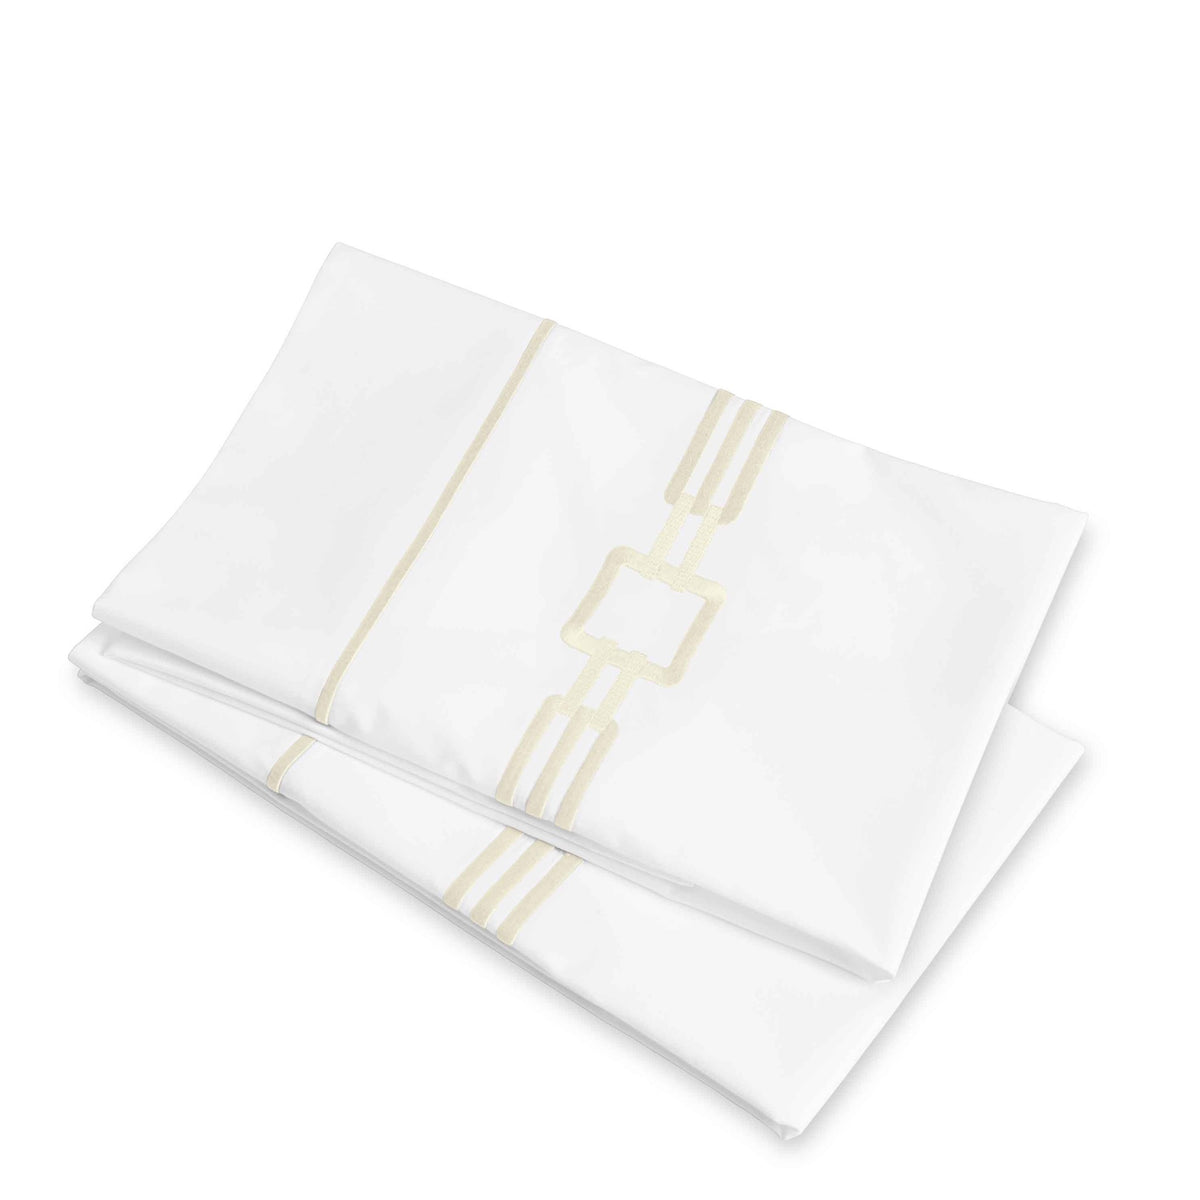 Clear Image of Signoria Retrò Pillowcases in White/Ivory Color